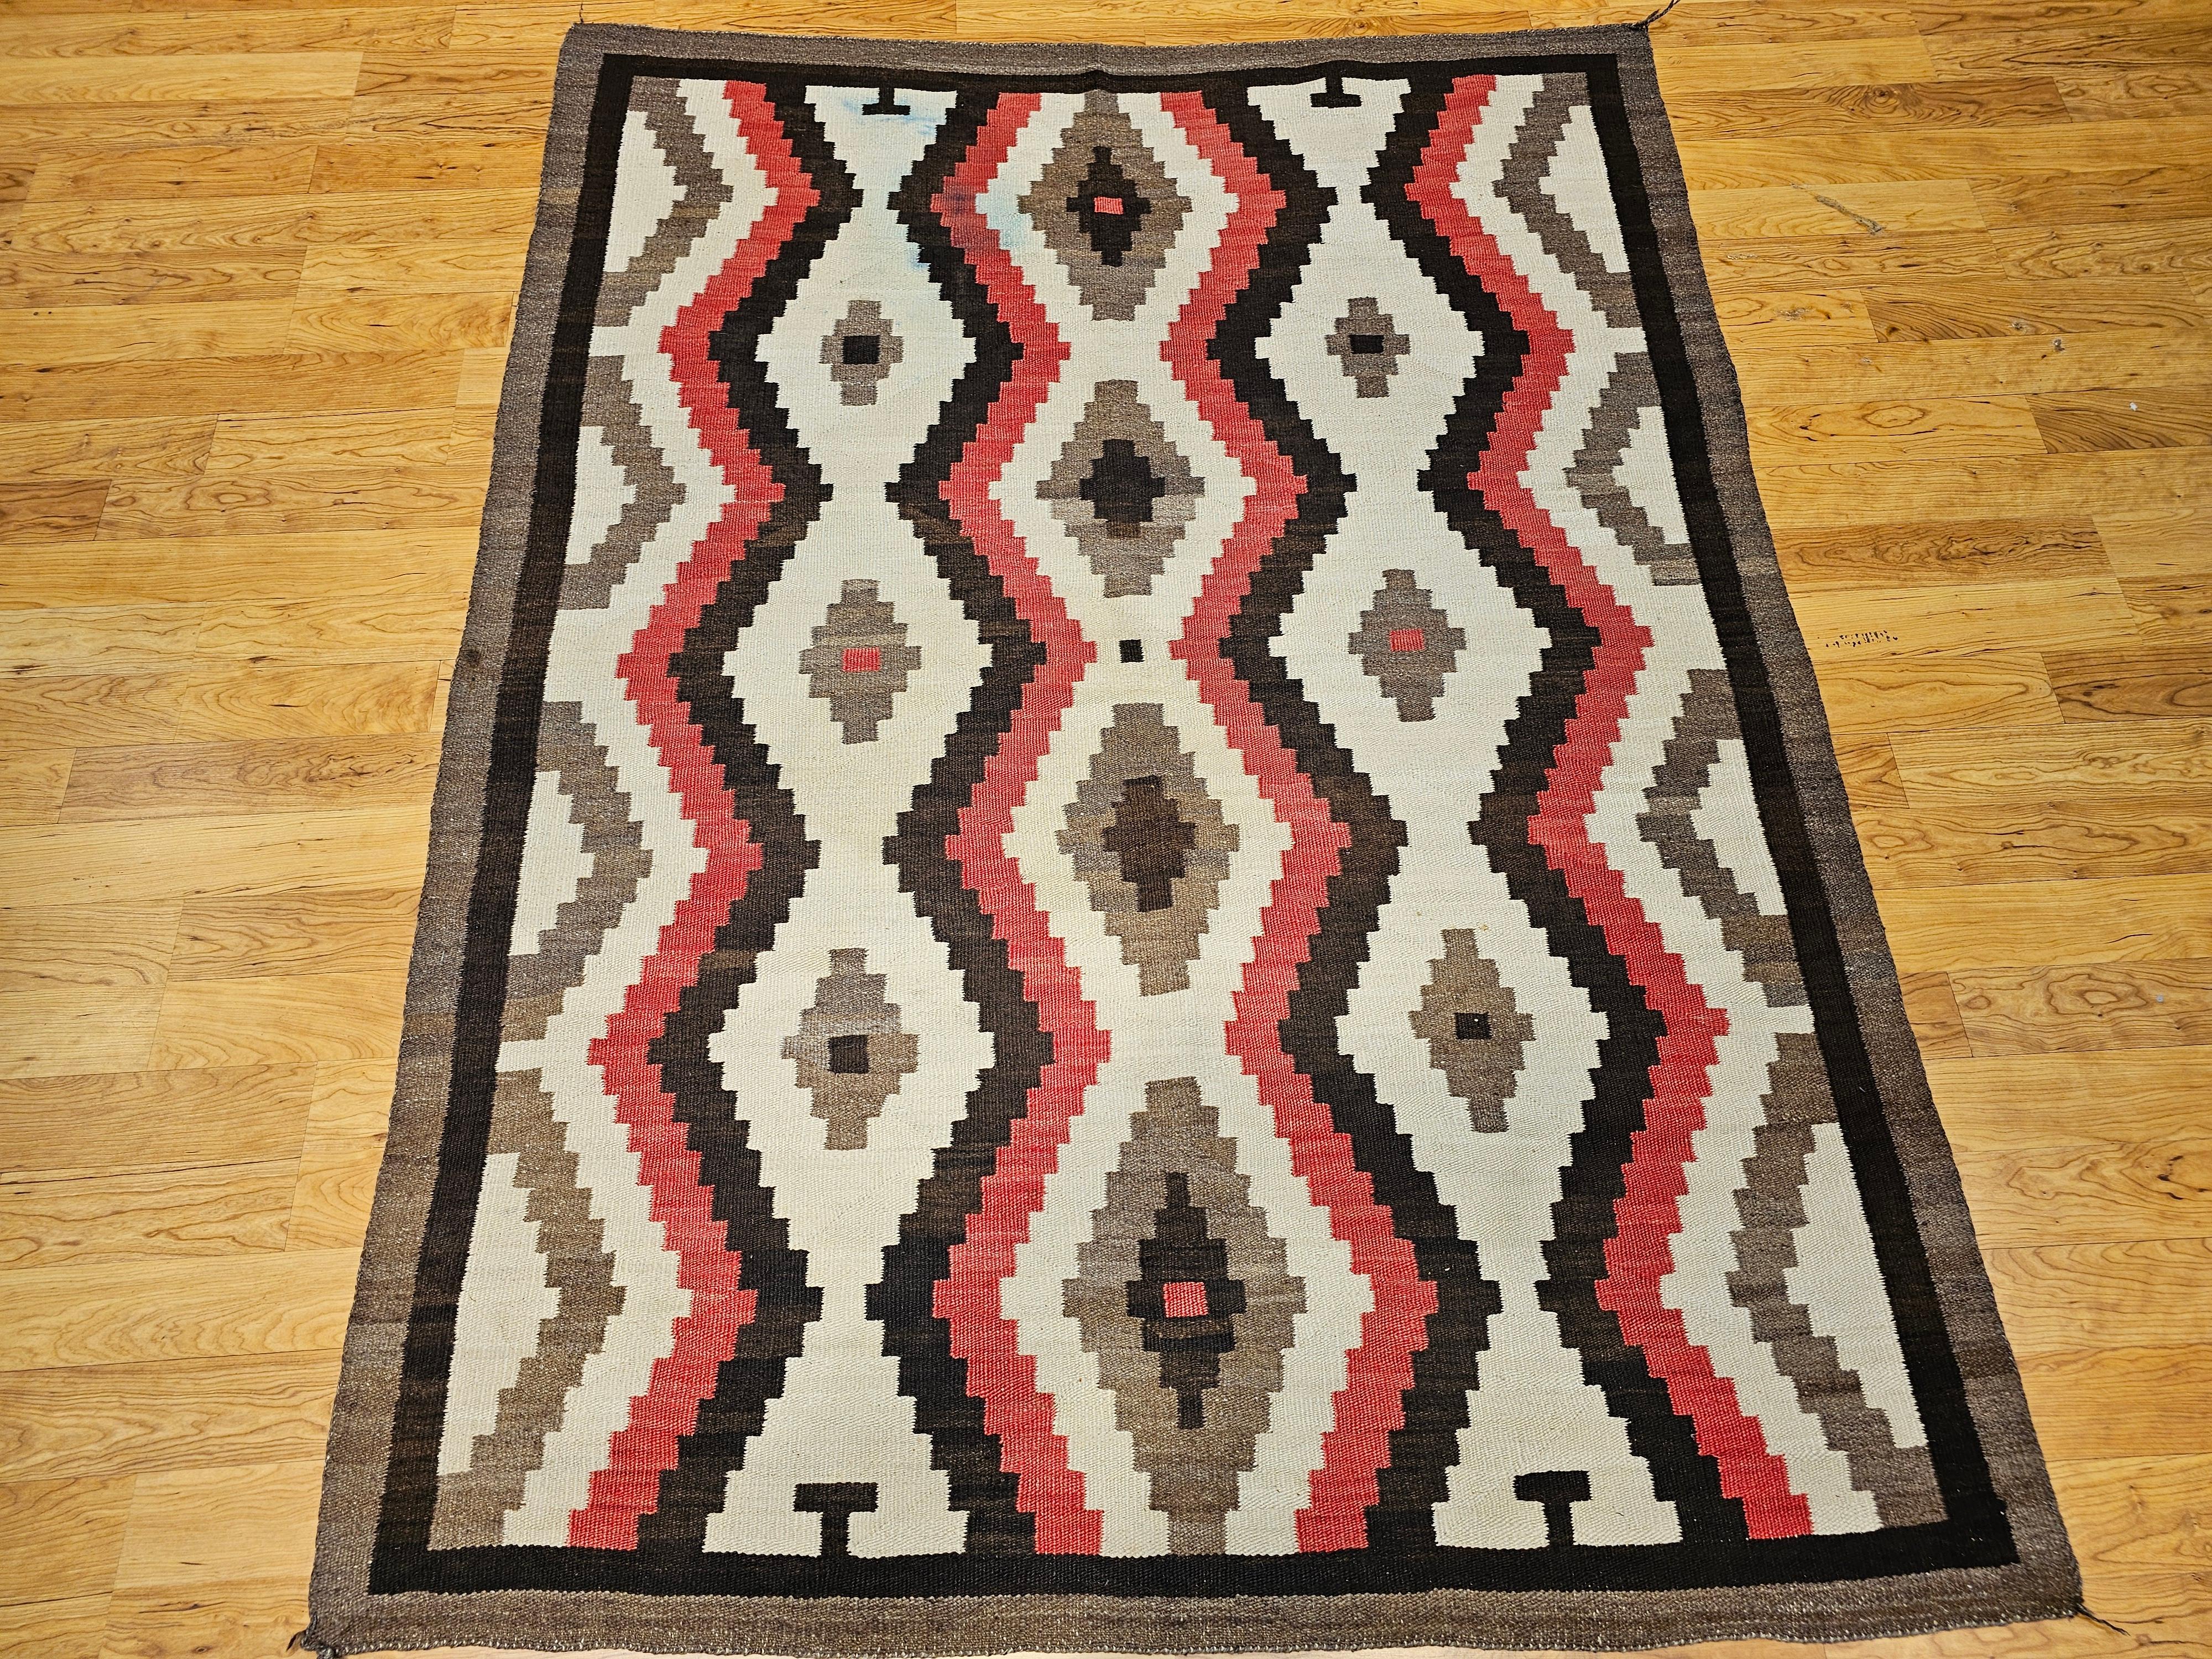 Large size and finely hand-woven Native American Navajo rug in eye dazzler diamond pattern in white, red, brown, and chocolate colors from the SW United States circa the early 1900s.   The pattern displays a series of vertical diamond forms that are